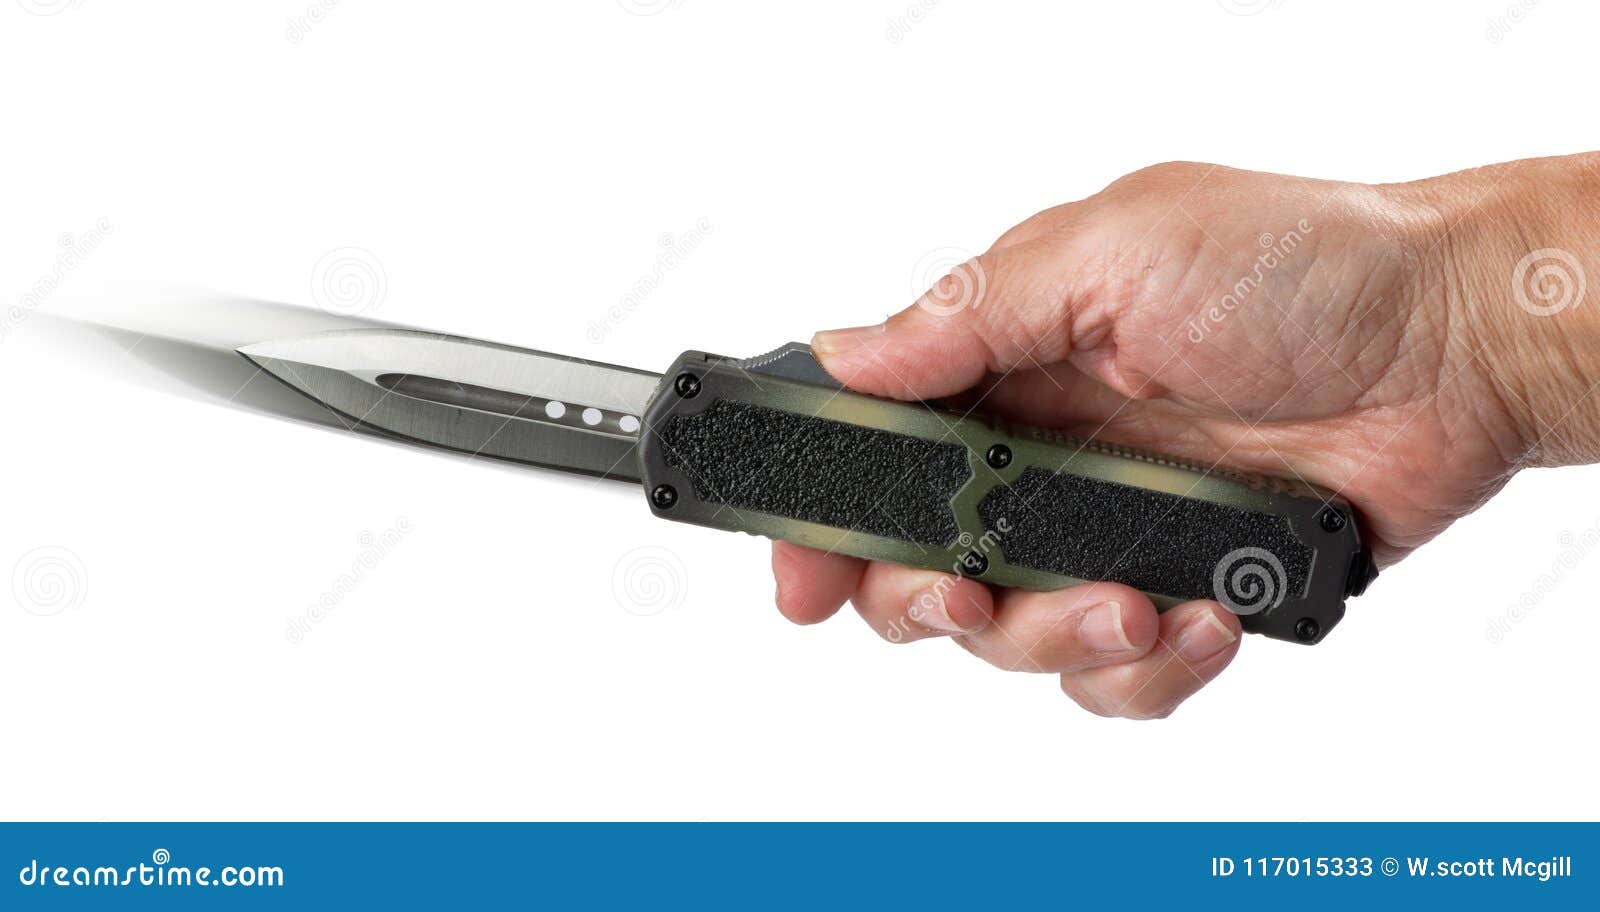 Automatic Knife onened. stock image. Image of armed - 117015333